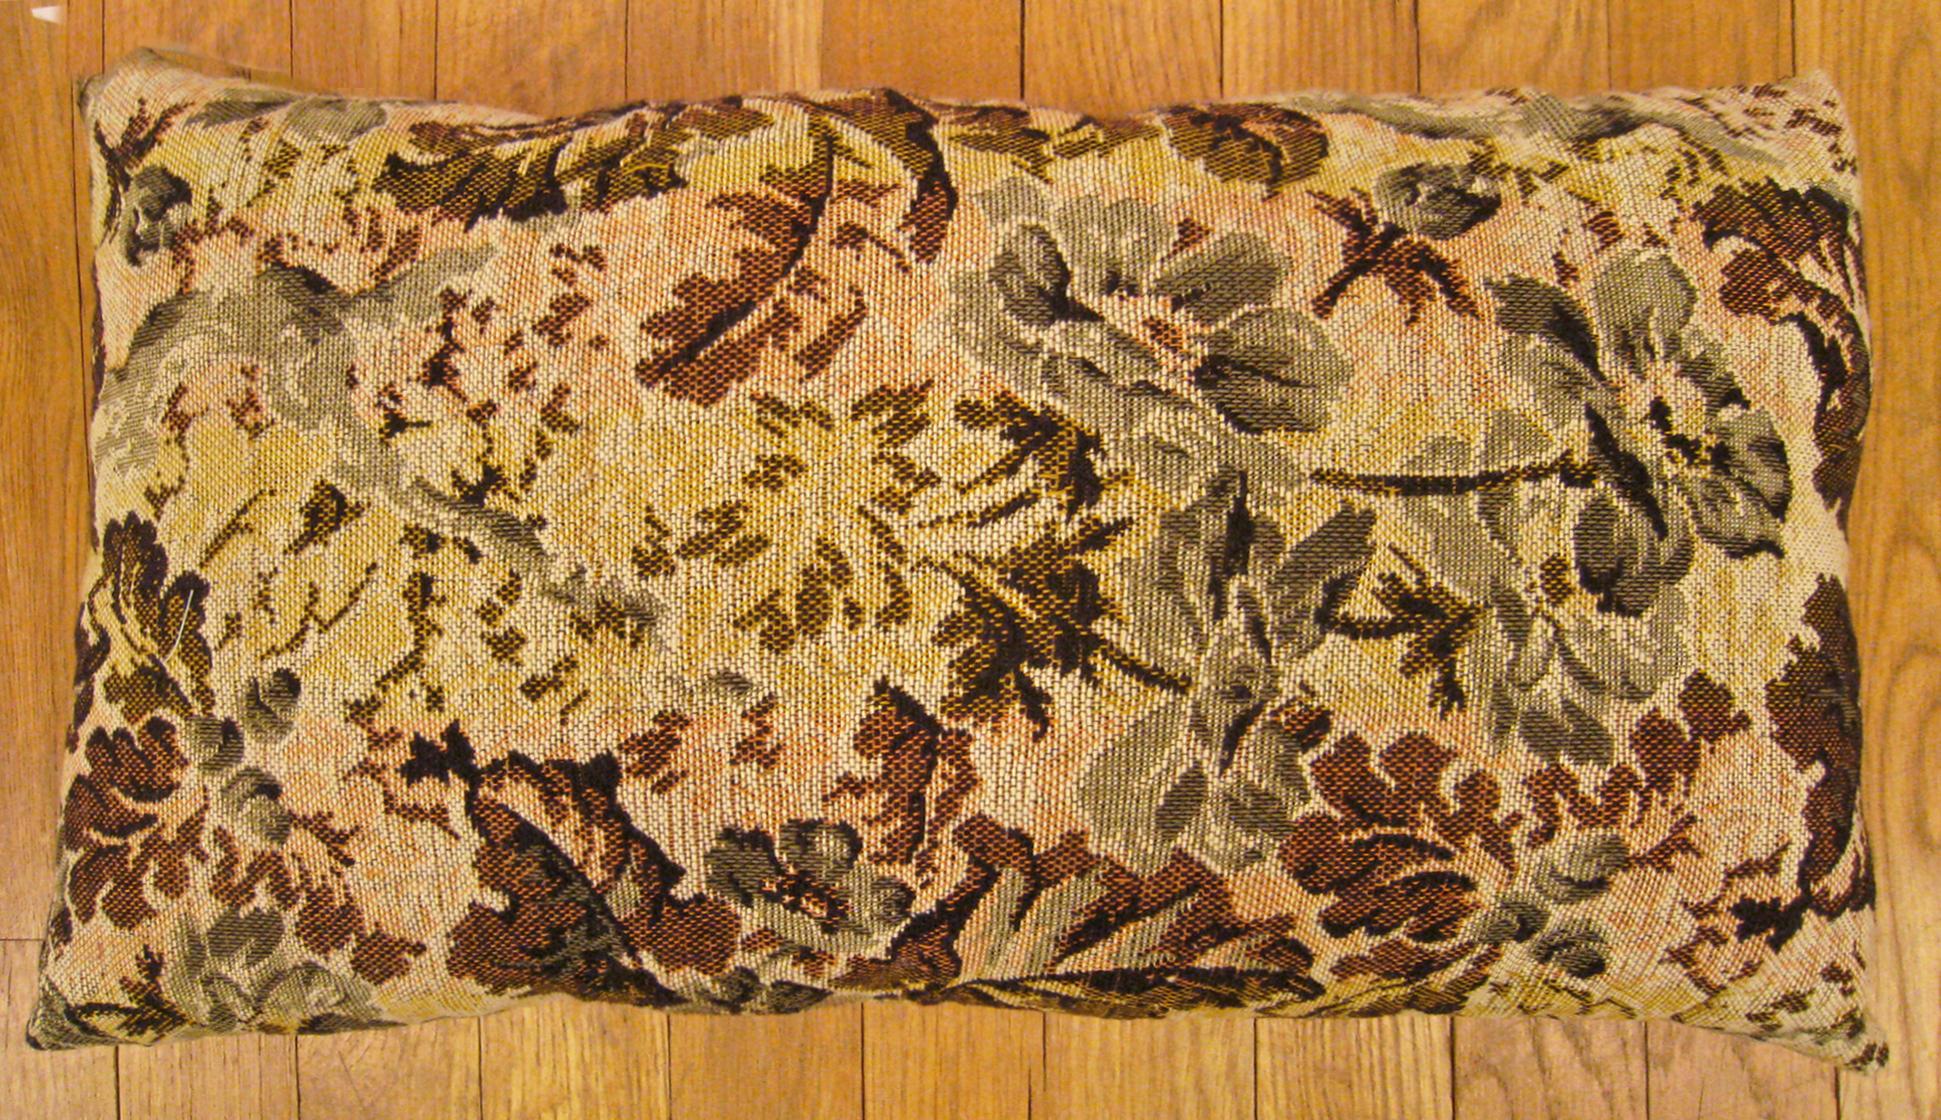 Antique Jacquard Tapestry pillow; size 1'0” x 1'8”. 

An antique decorative pillow with floral elements allover a light shrimp central field, size 1'0